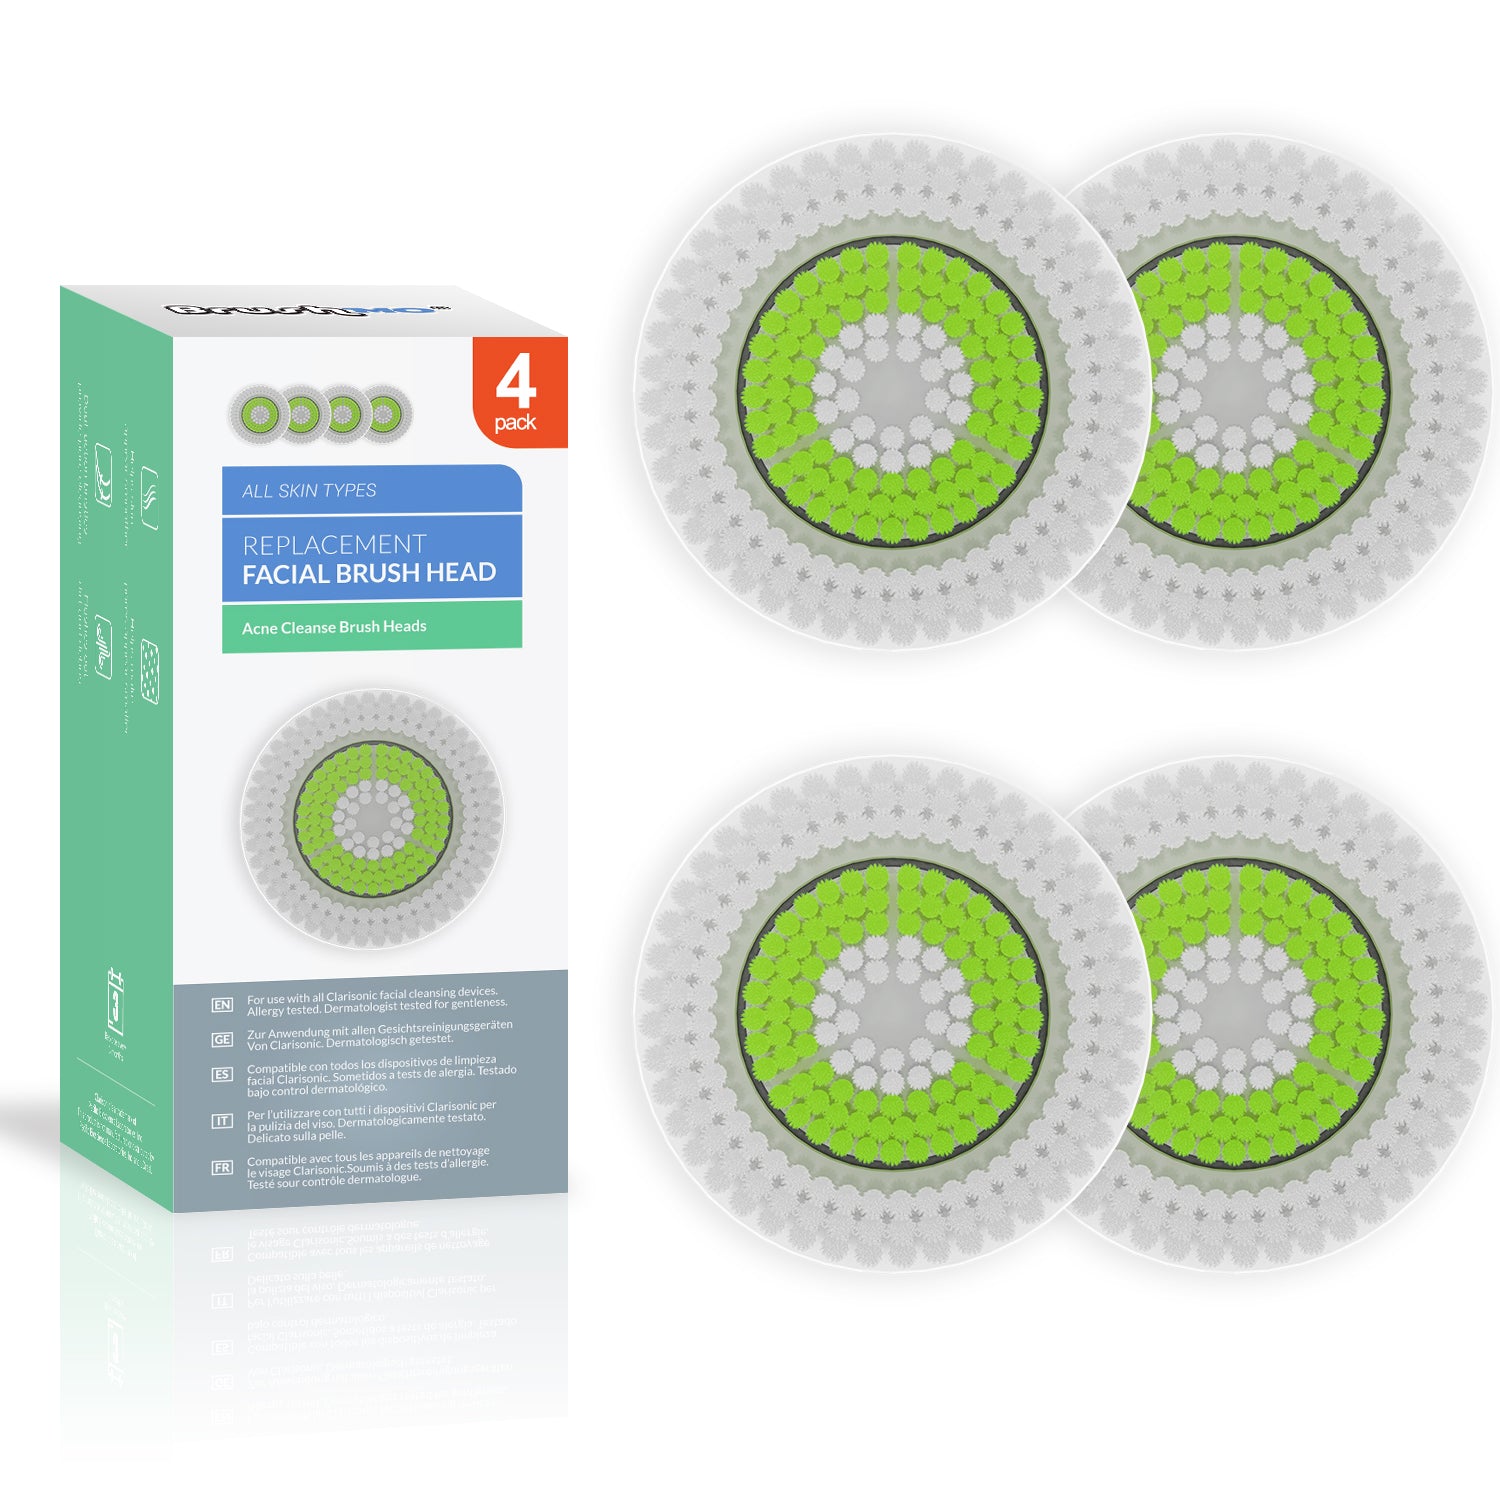 Replacement Facial Cleansing Brush Heads for Clarisonic, Acne Cleanse, 4 Pack